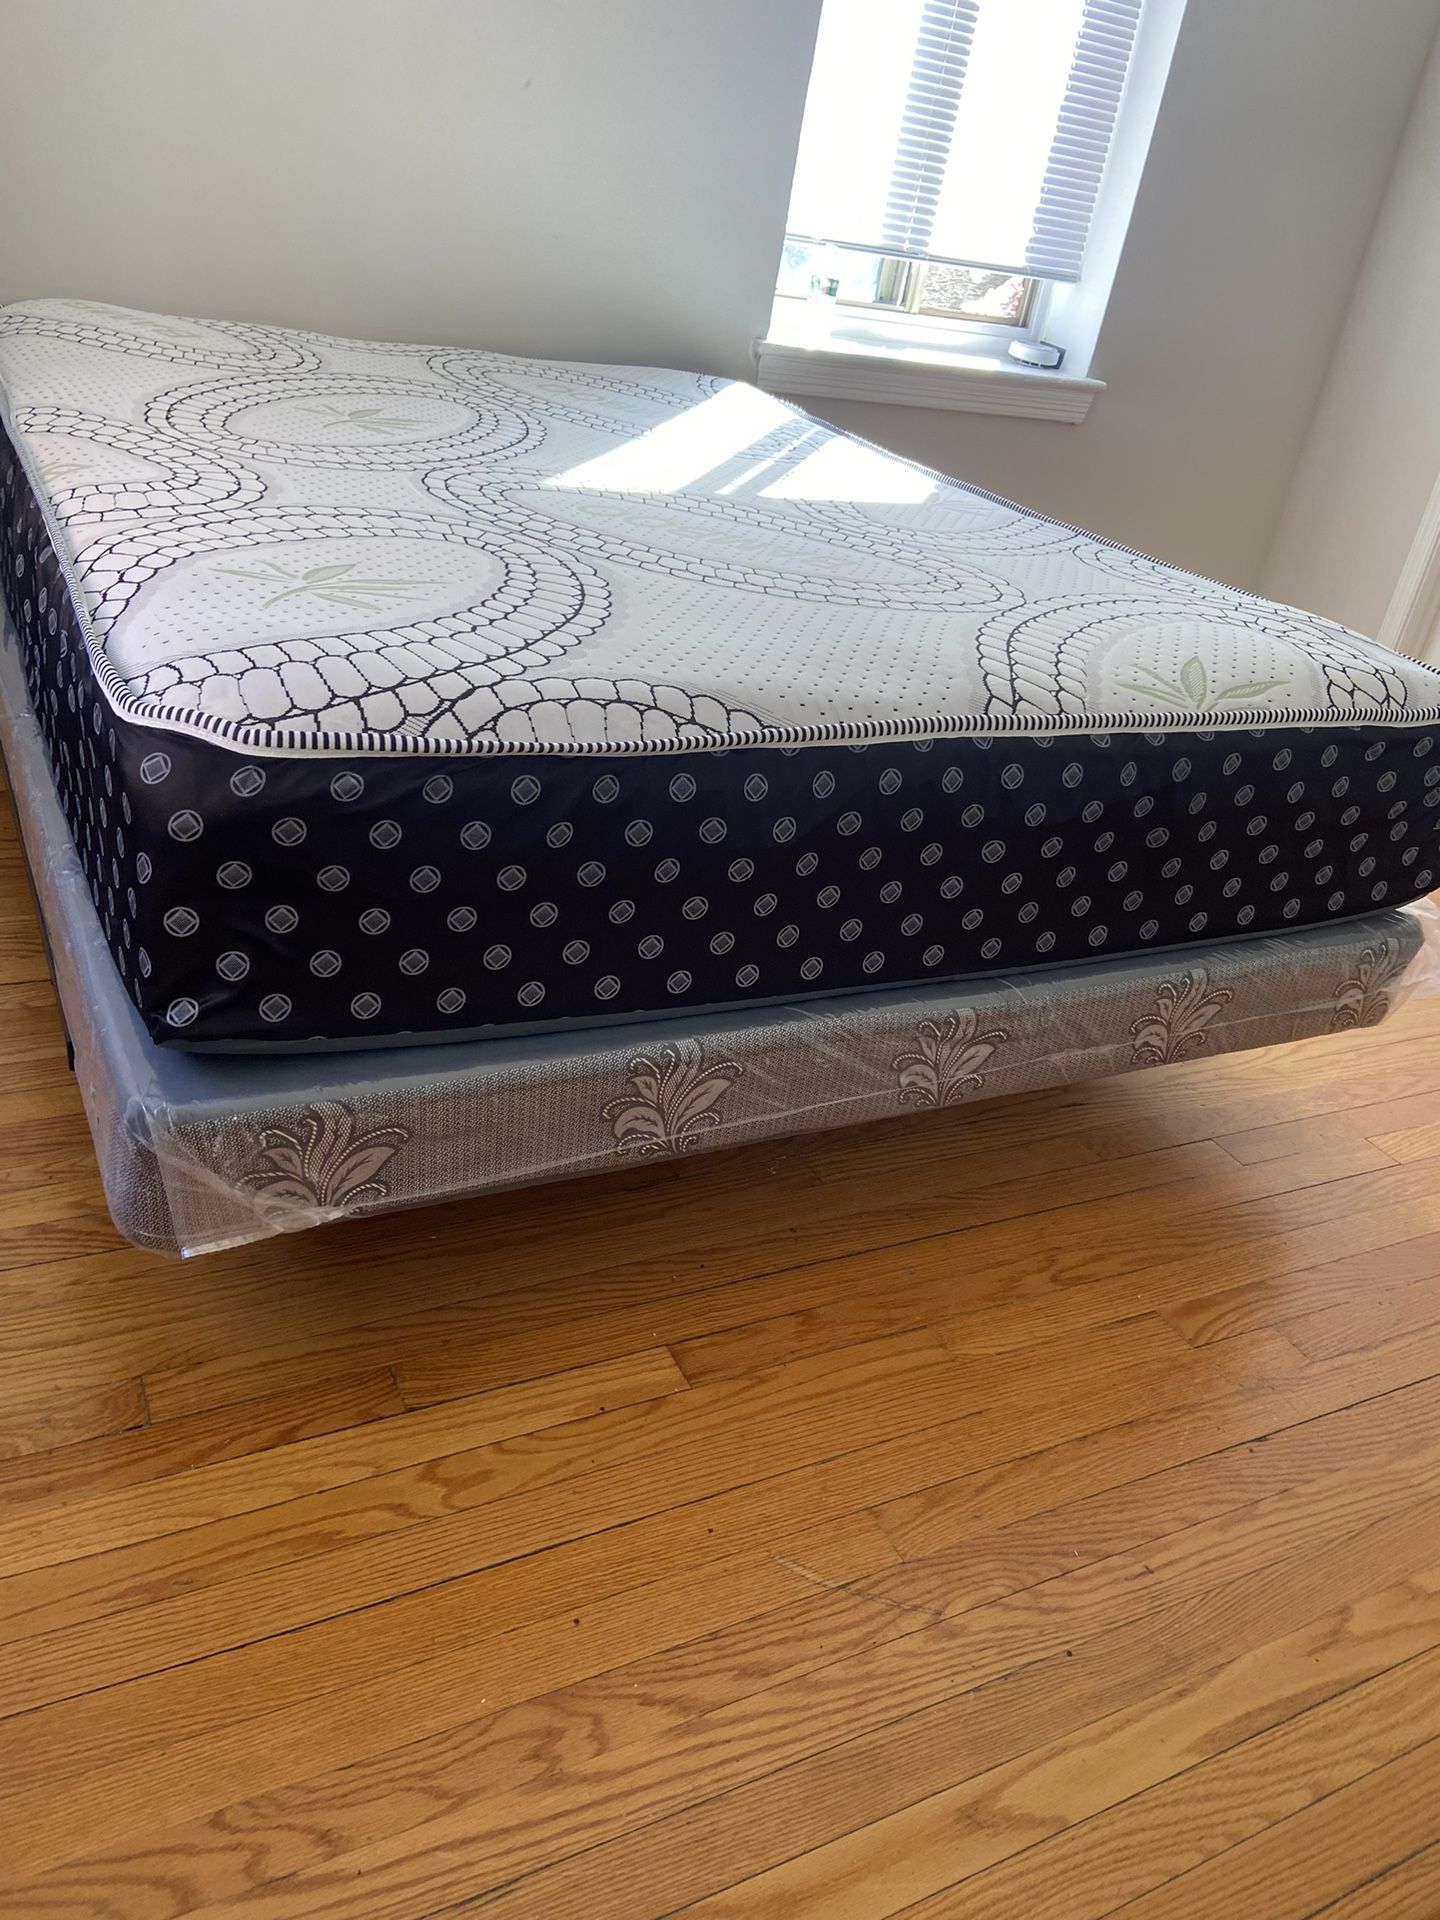 Queen Mattress Come With Rail Frame And Free Box Spring - Same Day Delivery 